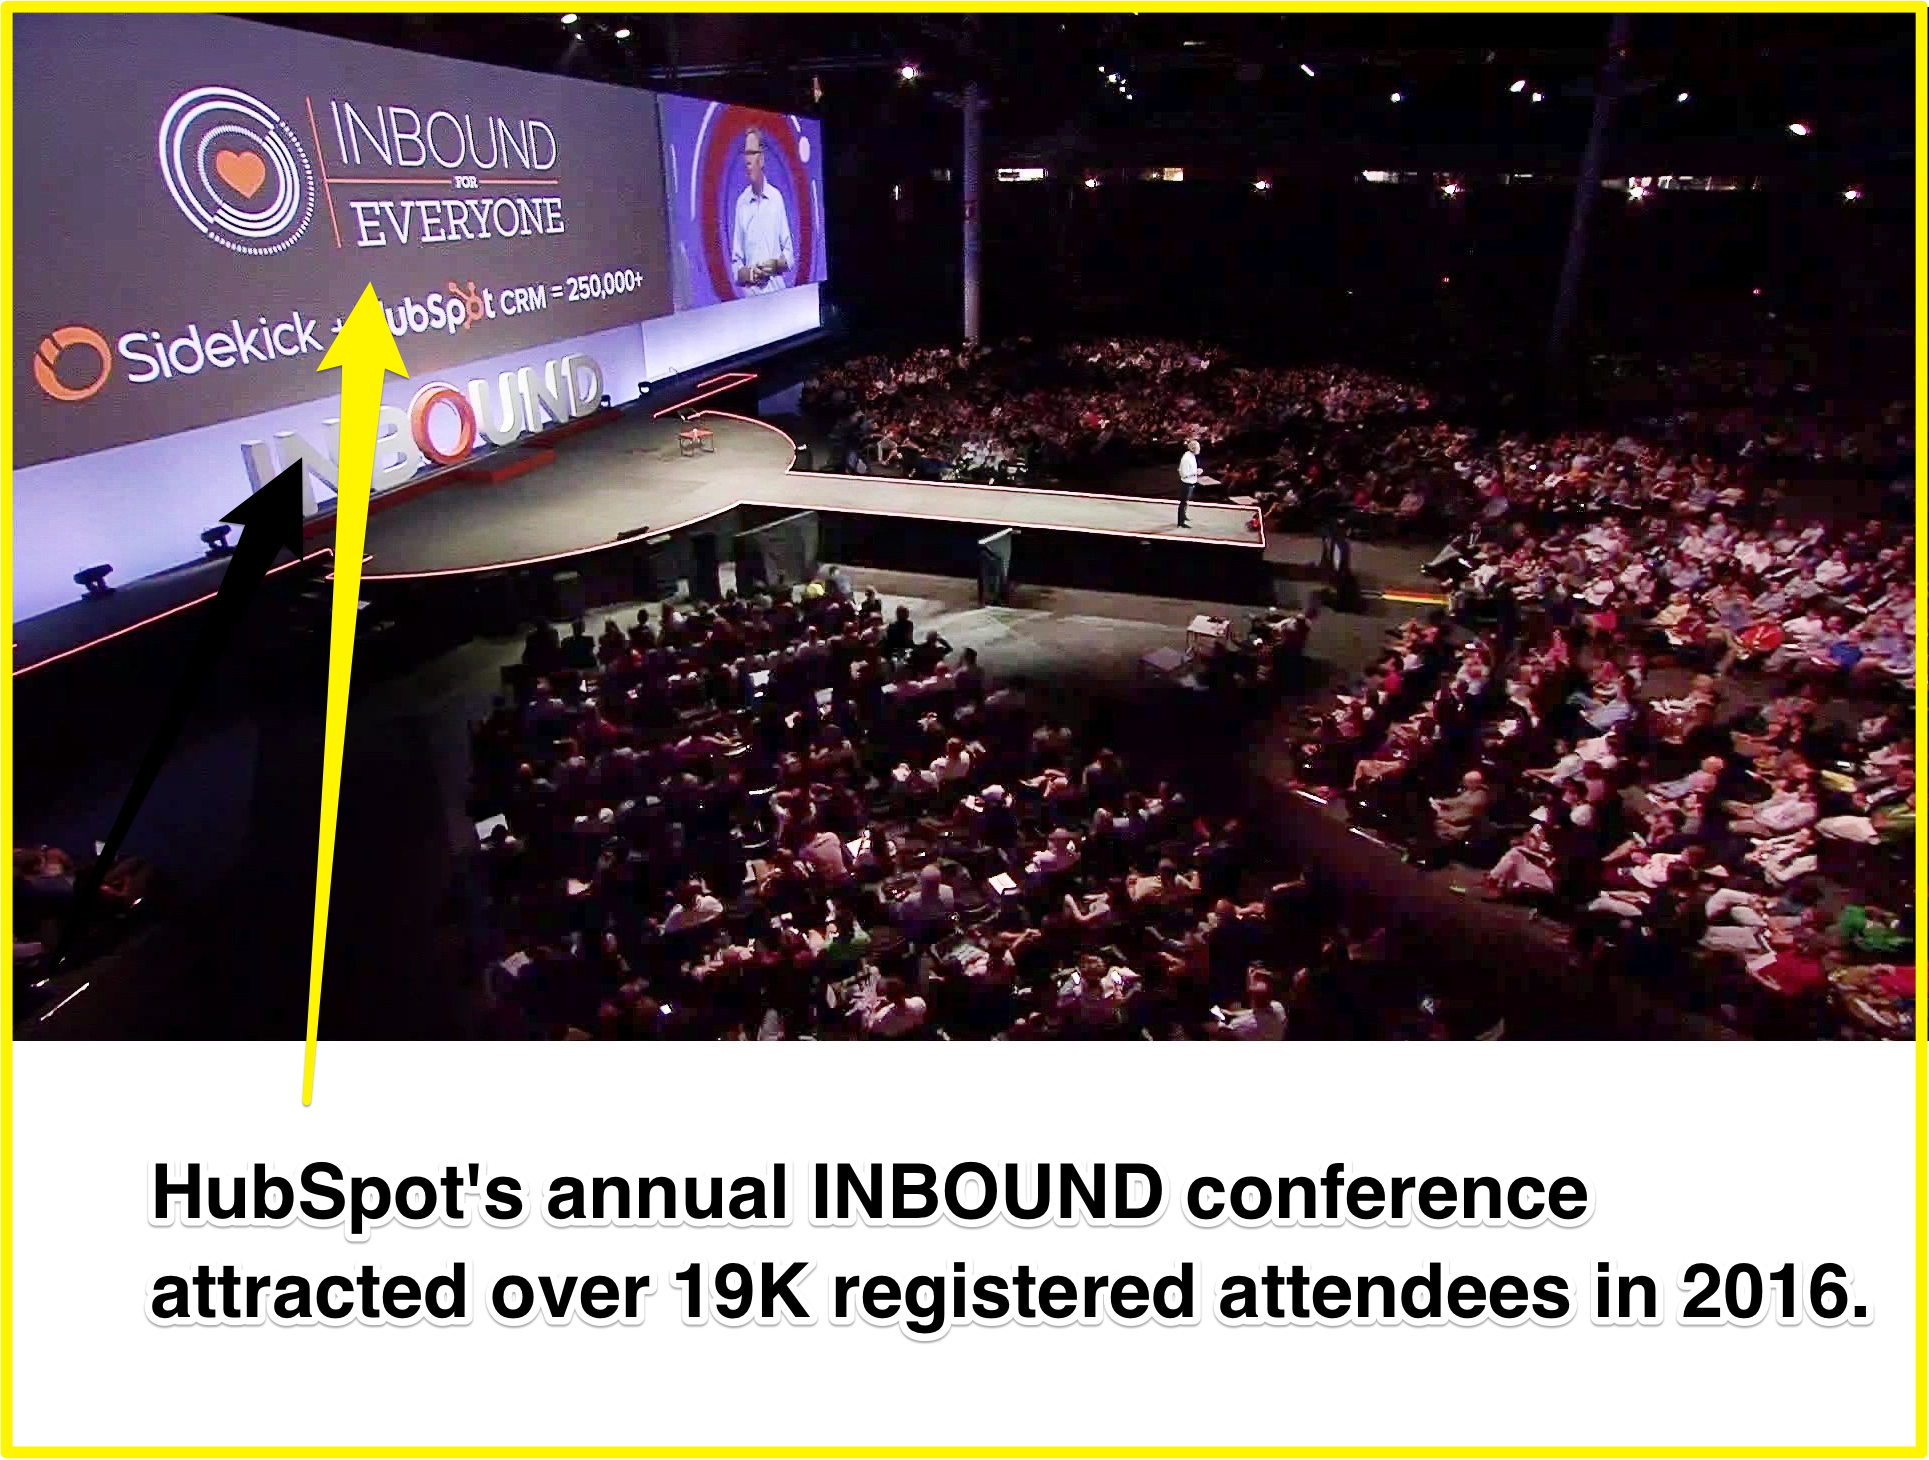 Screenshot showing information about a hubspot conference